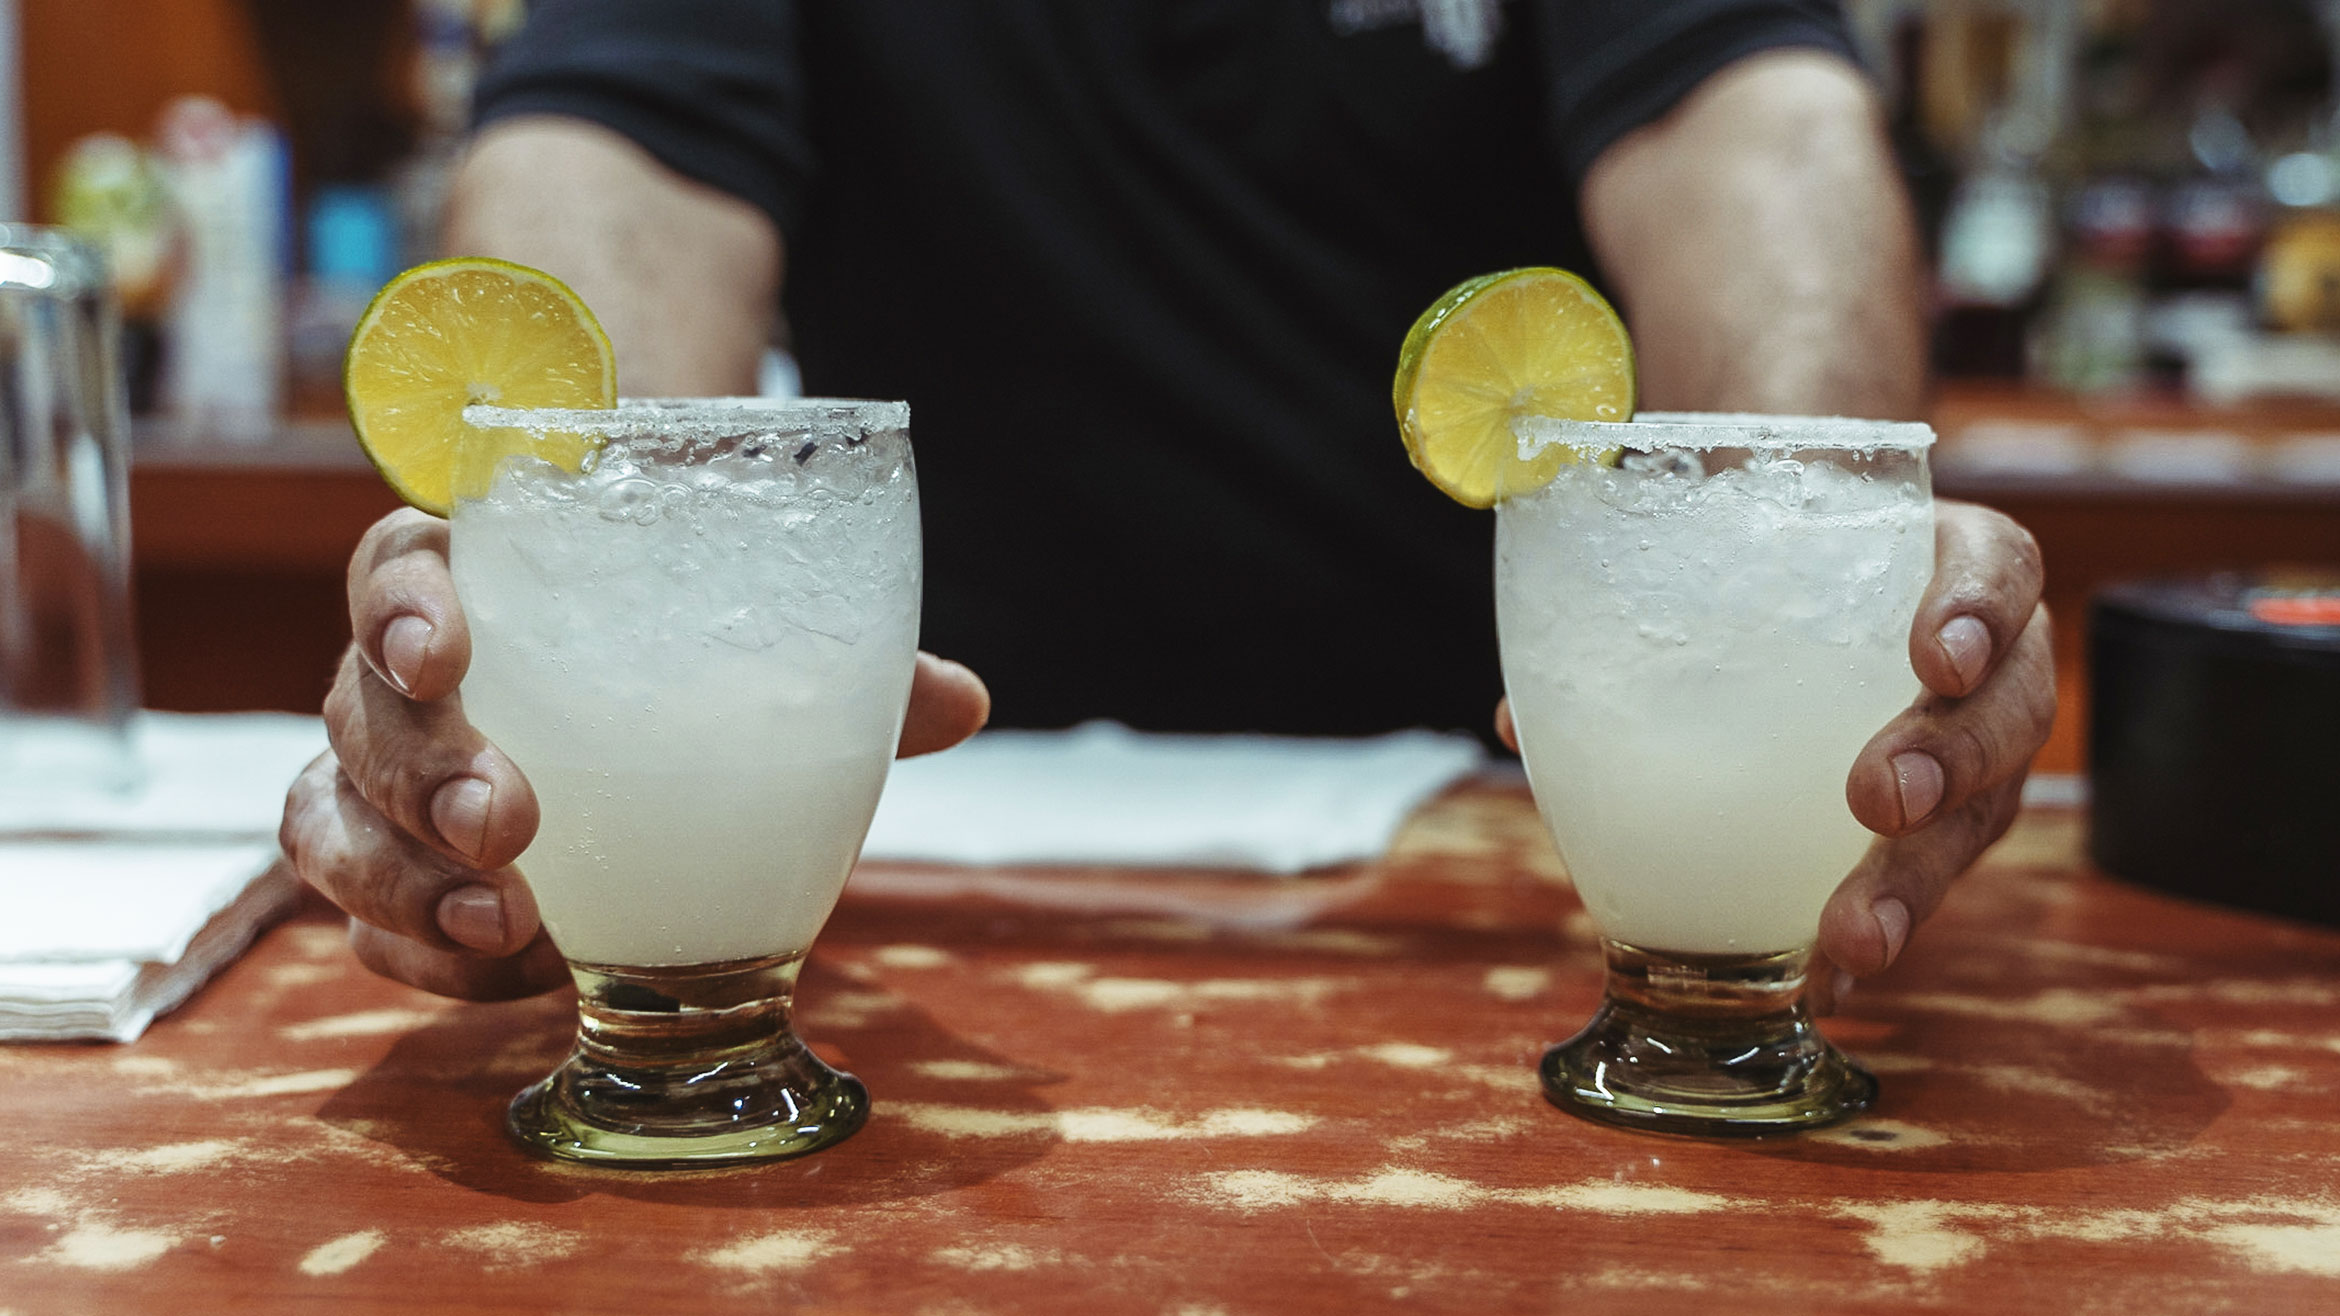 A bartender presents two margaritas